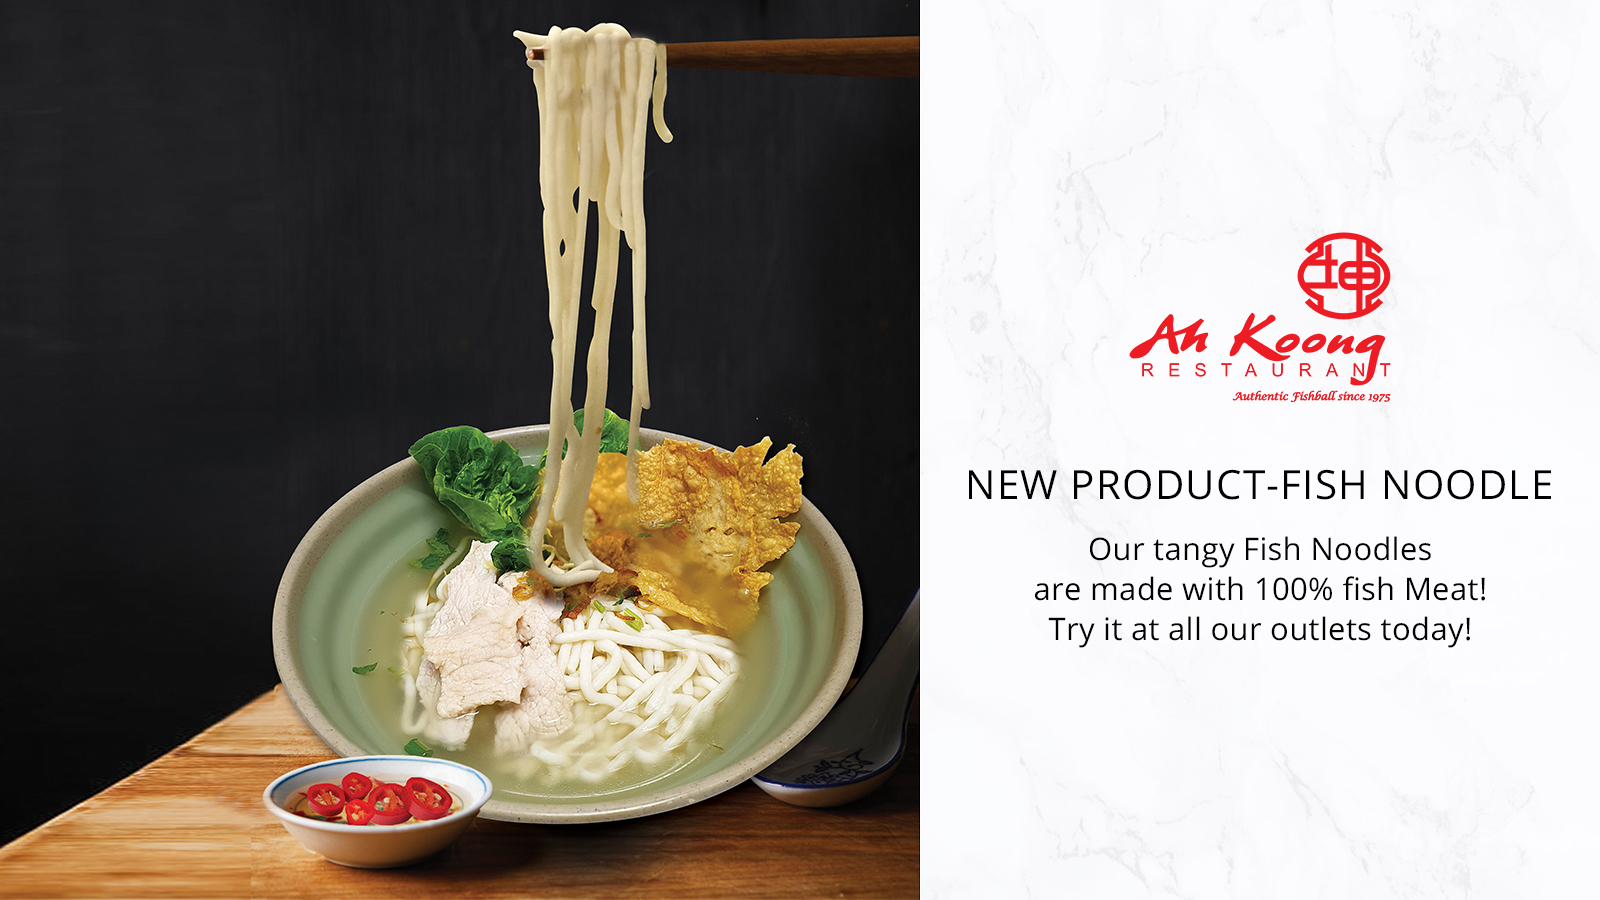 New Product-Fish Noodle